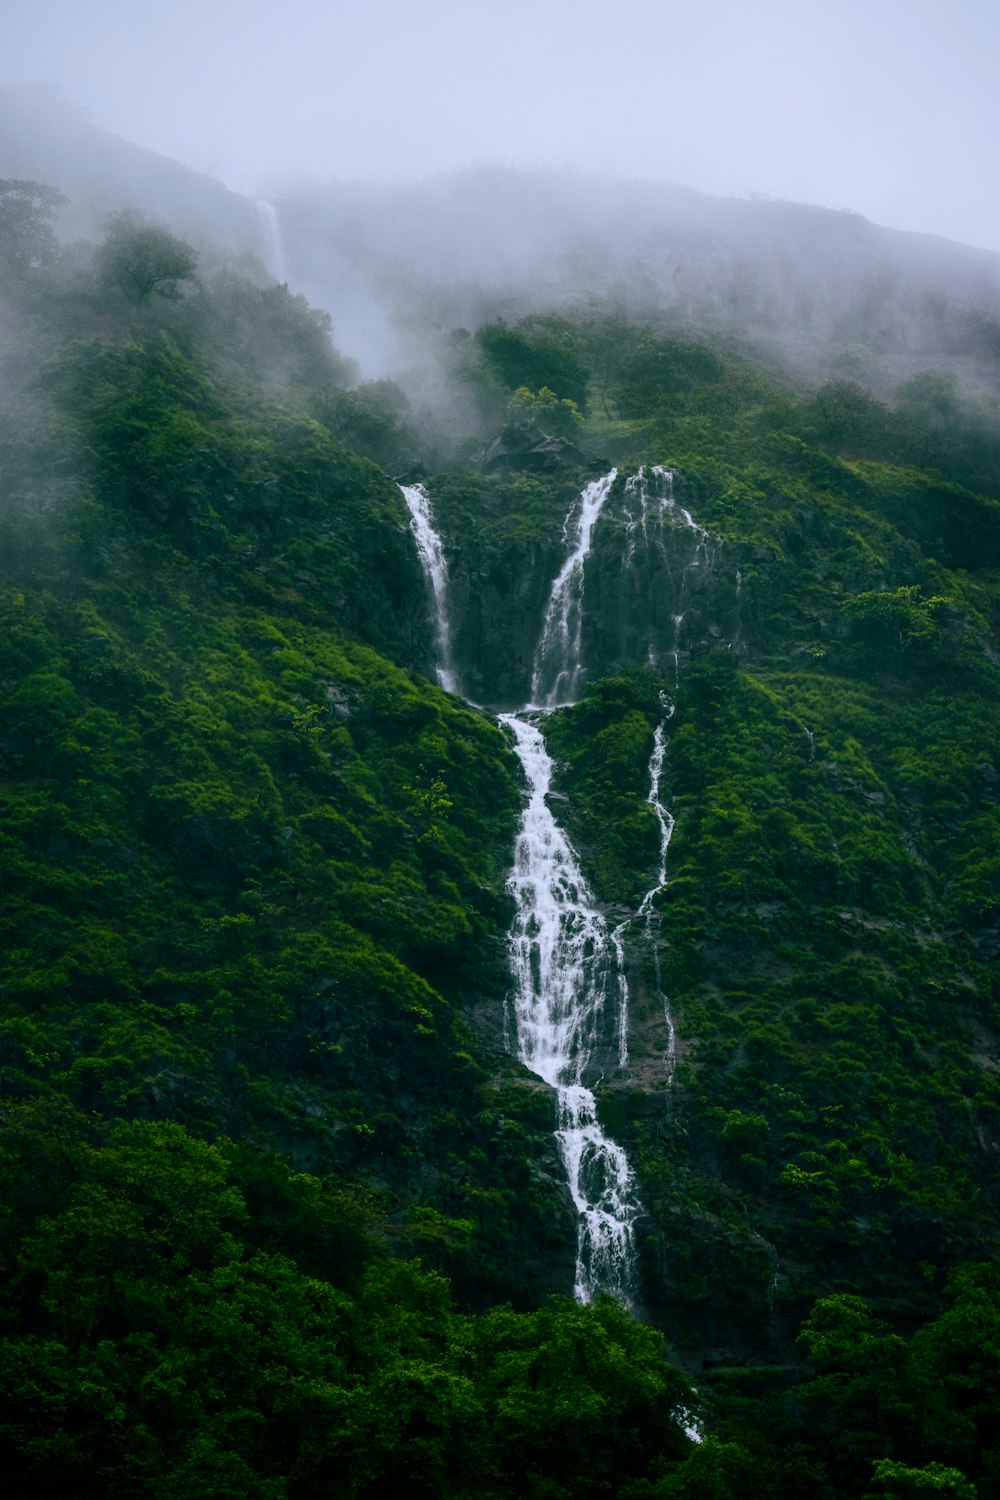 a group of waterfalls in a forest